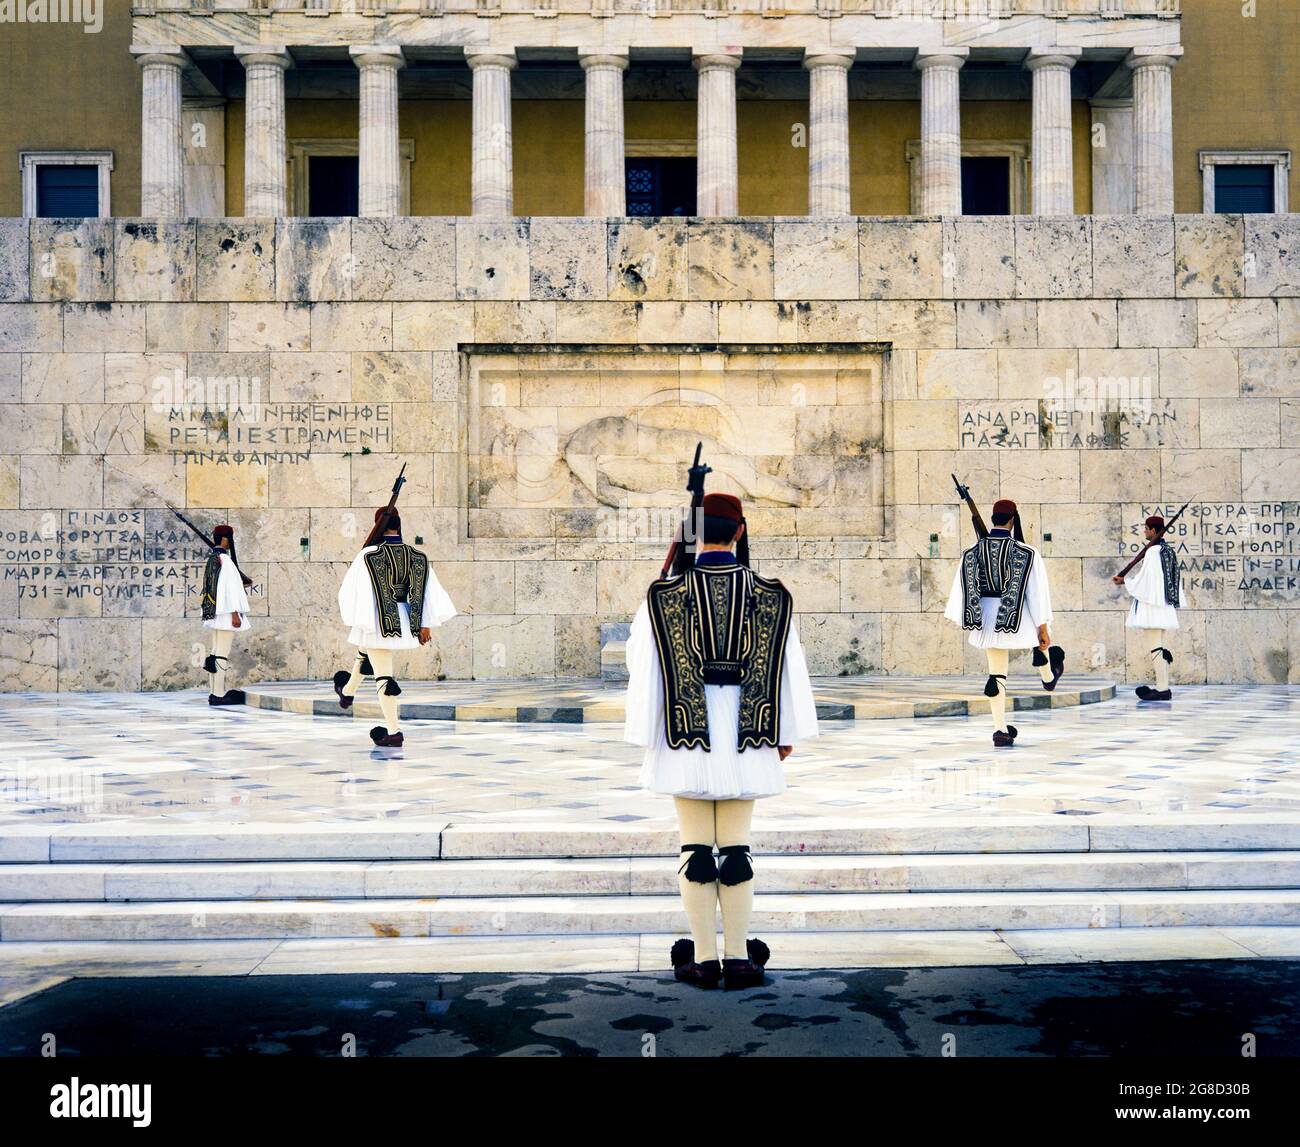 Athens, Evzones presidential guards mounting guard at the tomb of the unkown soldier monument, Vouli Greek Parliament building, Greece, Europe, Stock Photo